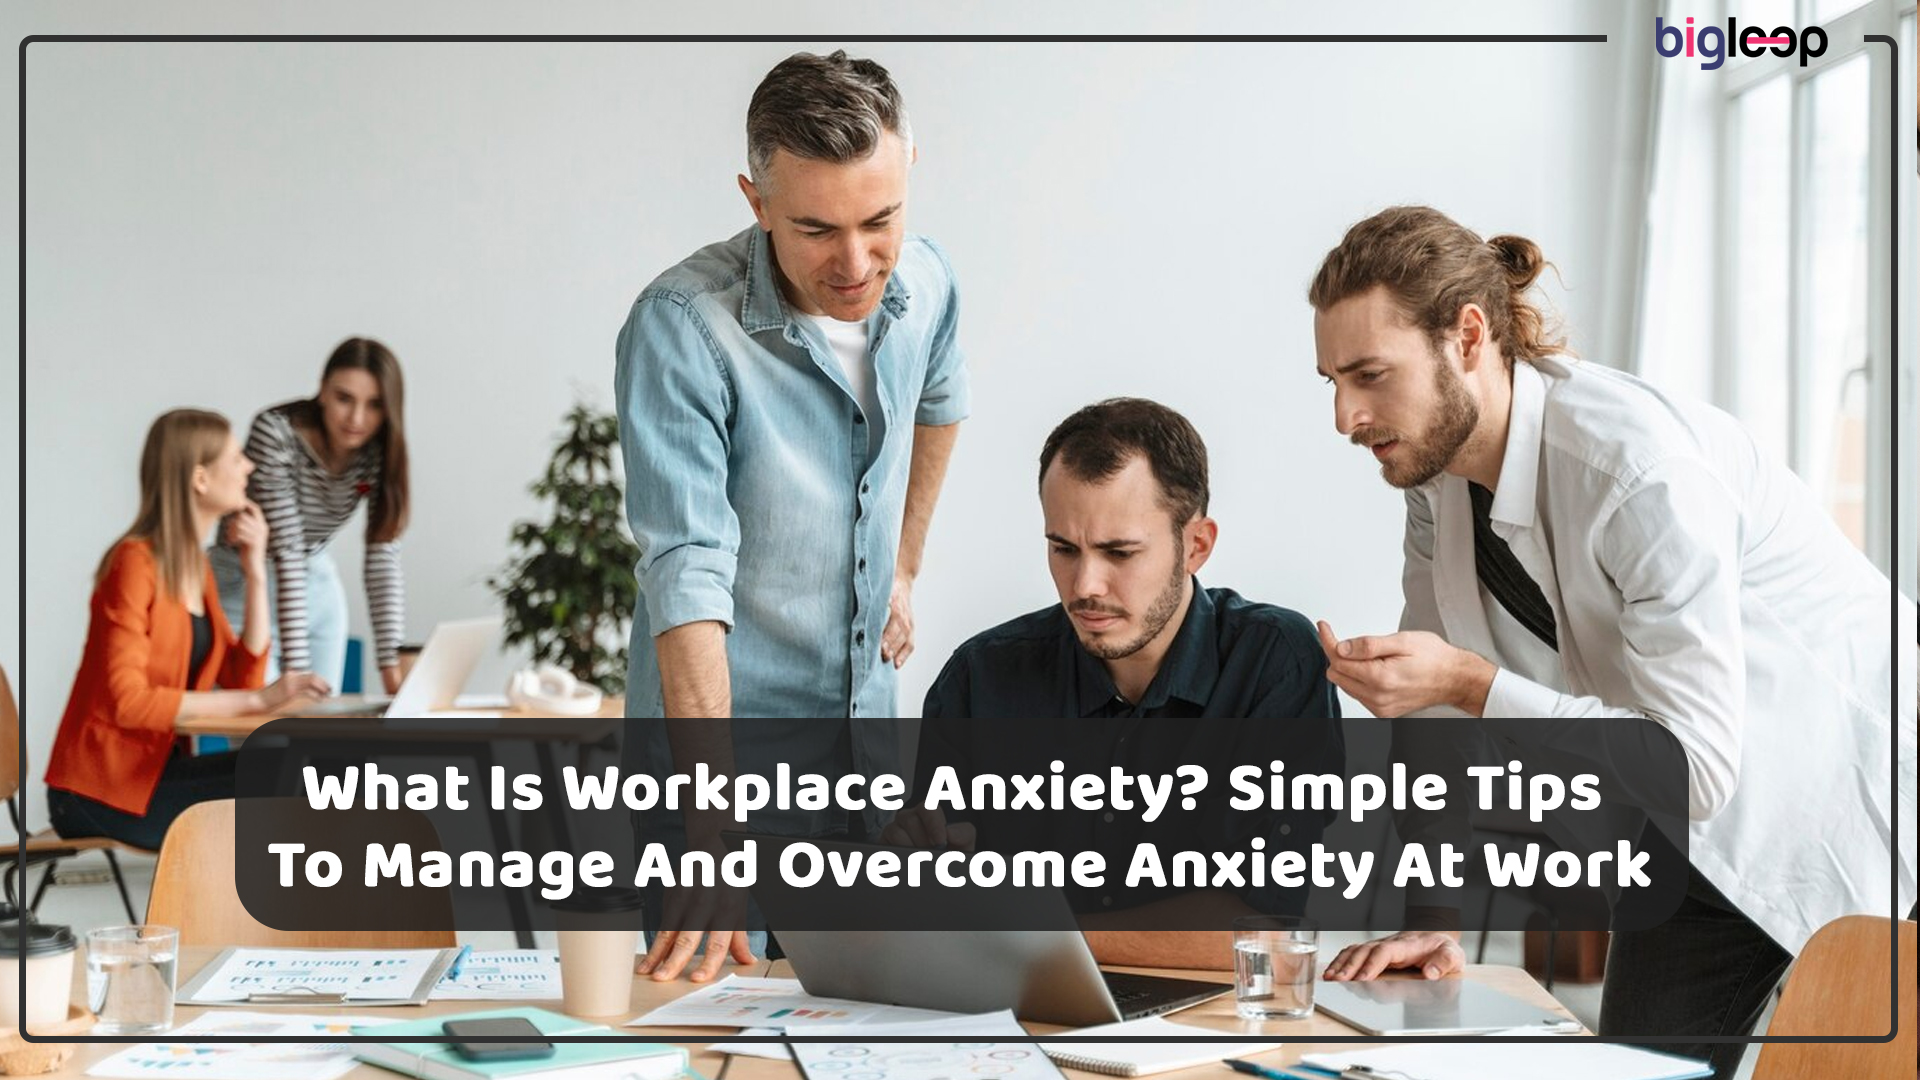 What Is Workplace Anxiety? Simple Tips To Manage And Overcome Anxiety At Work